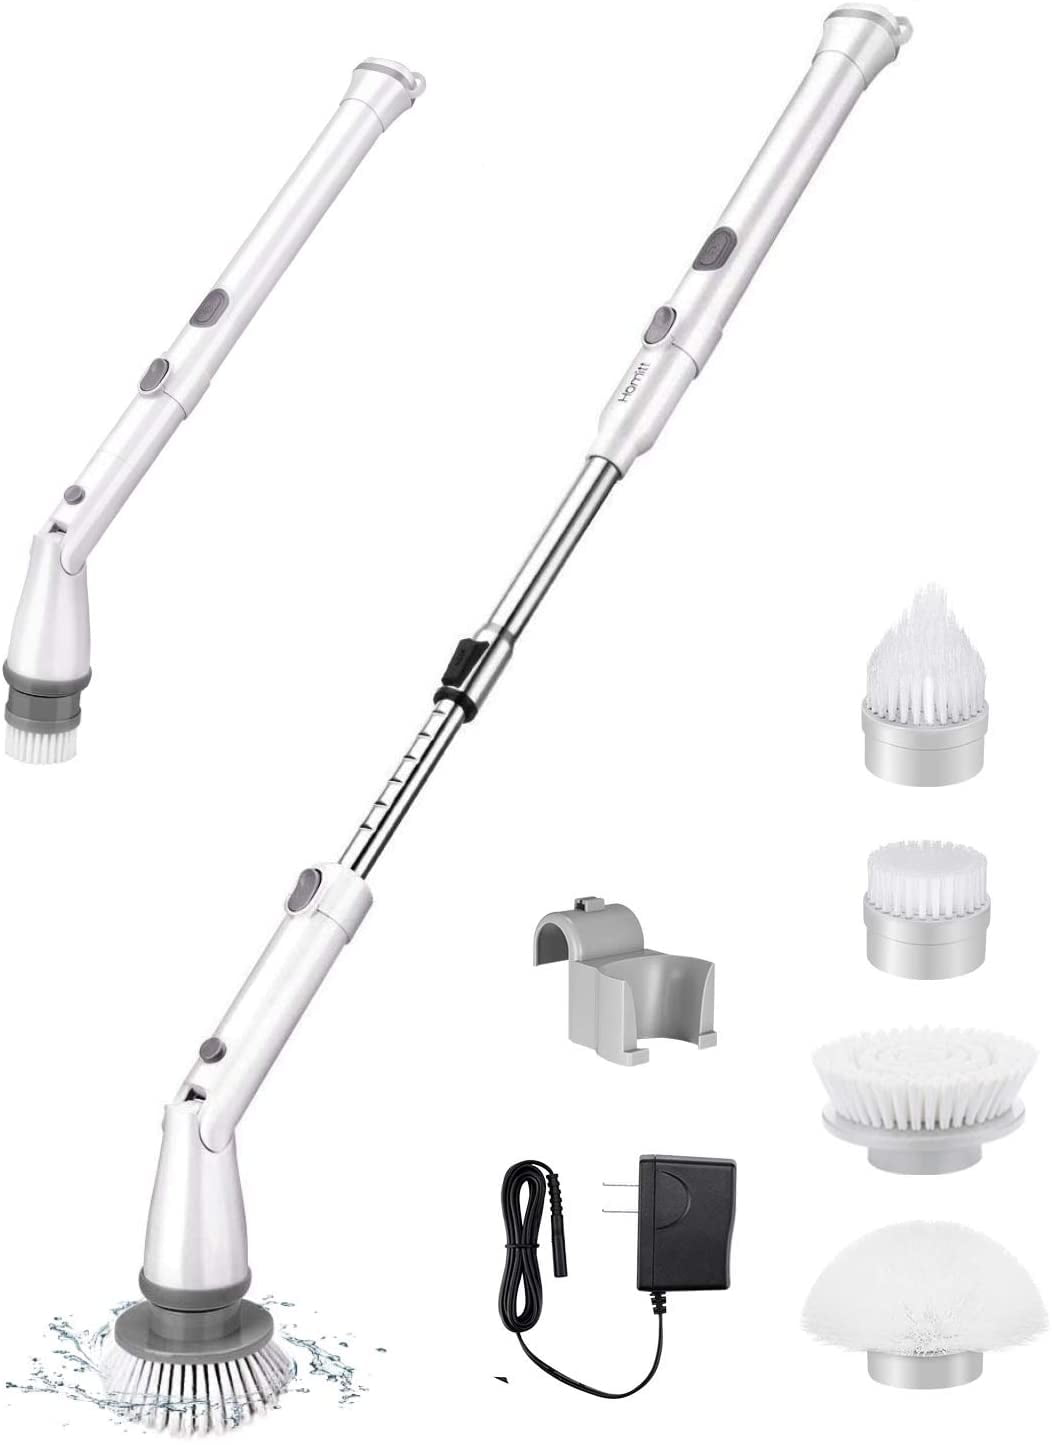 Tile Grout Floor Kitchen and Sink Cordless and Handheld Bathroom Scrubber with 3 Replaceable Brush Heads High Rotation for Cleaning Shower Homitt Electric Spin Scrubber Power Cleaning Brush 